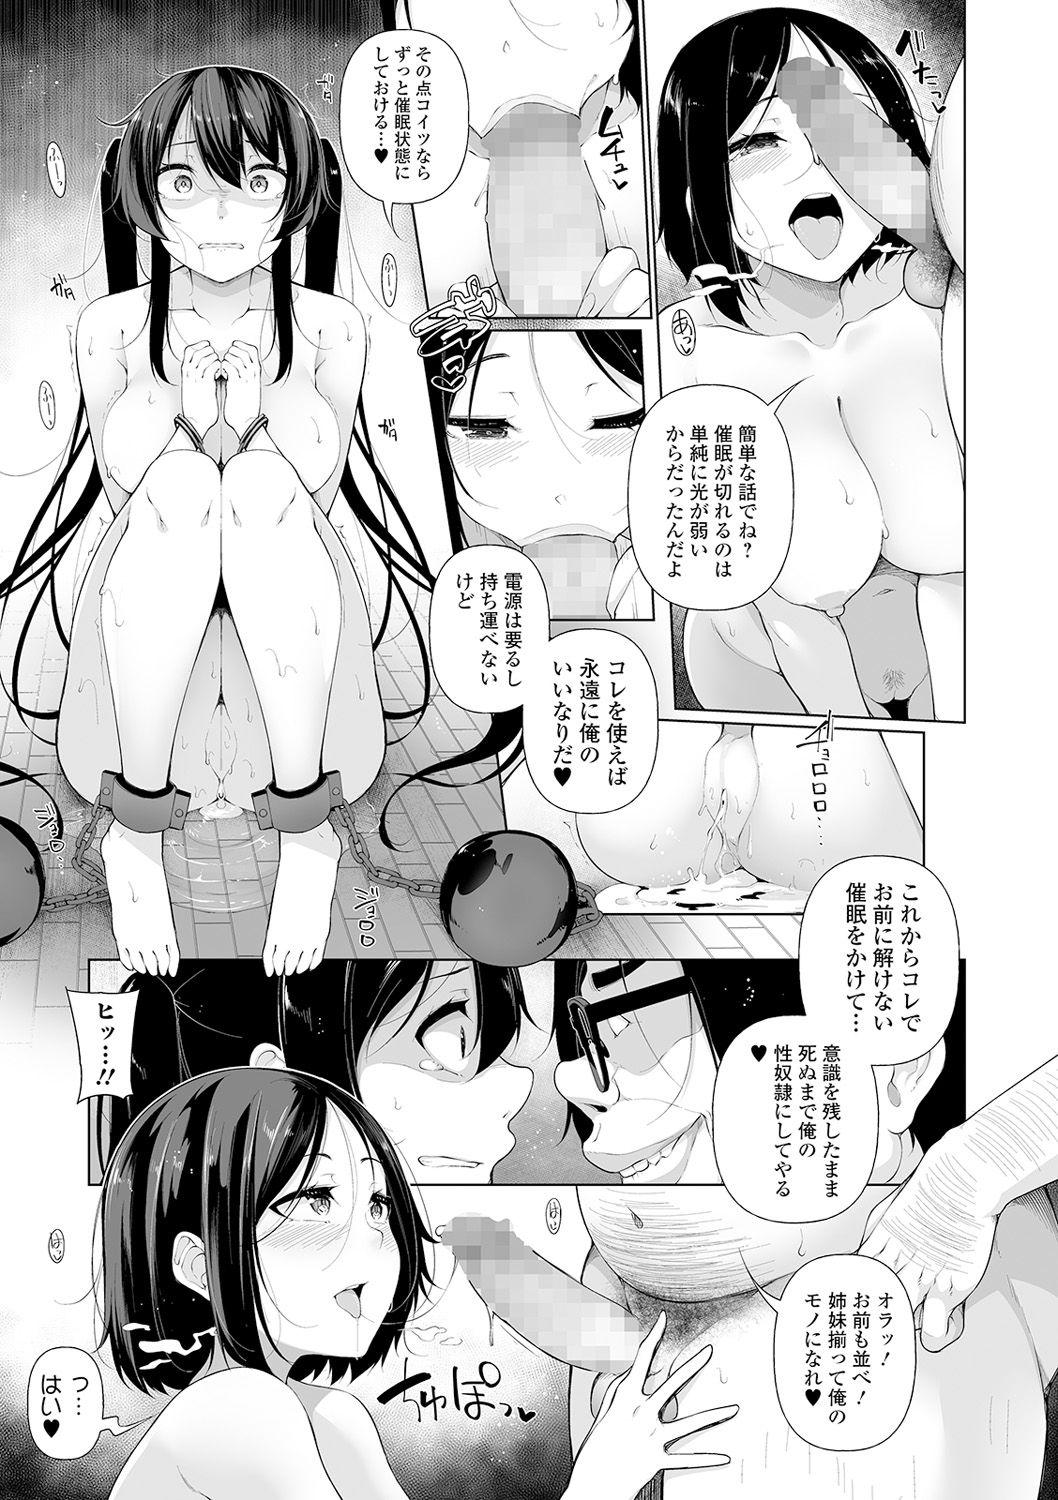 Oldvsyoung COMIC Mate Legend Vol. 33 2020-06 Online - Page 11